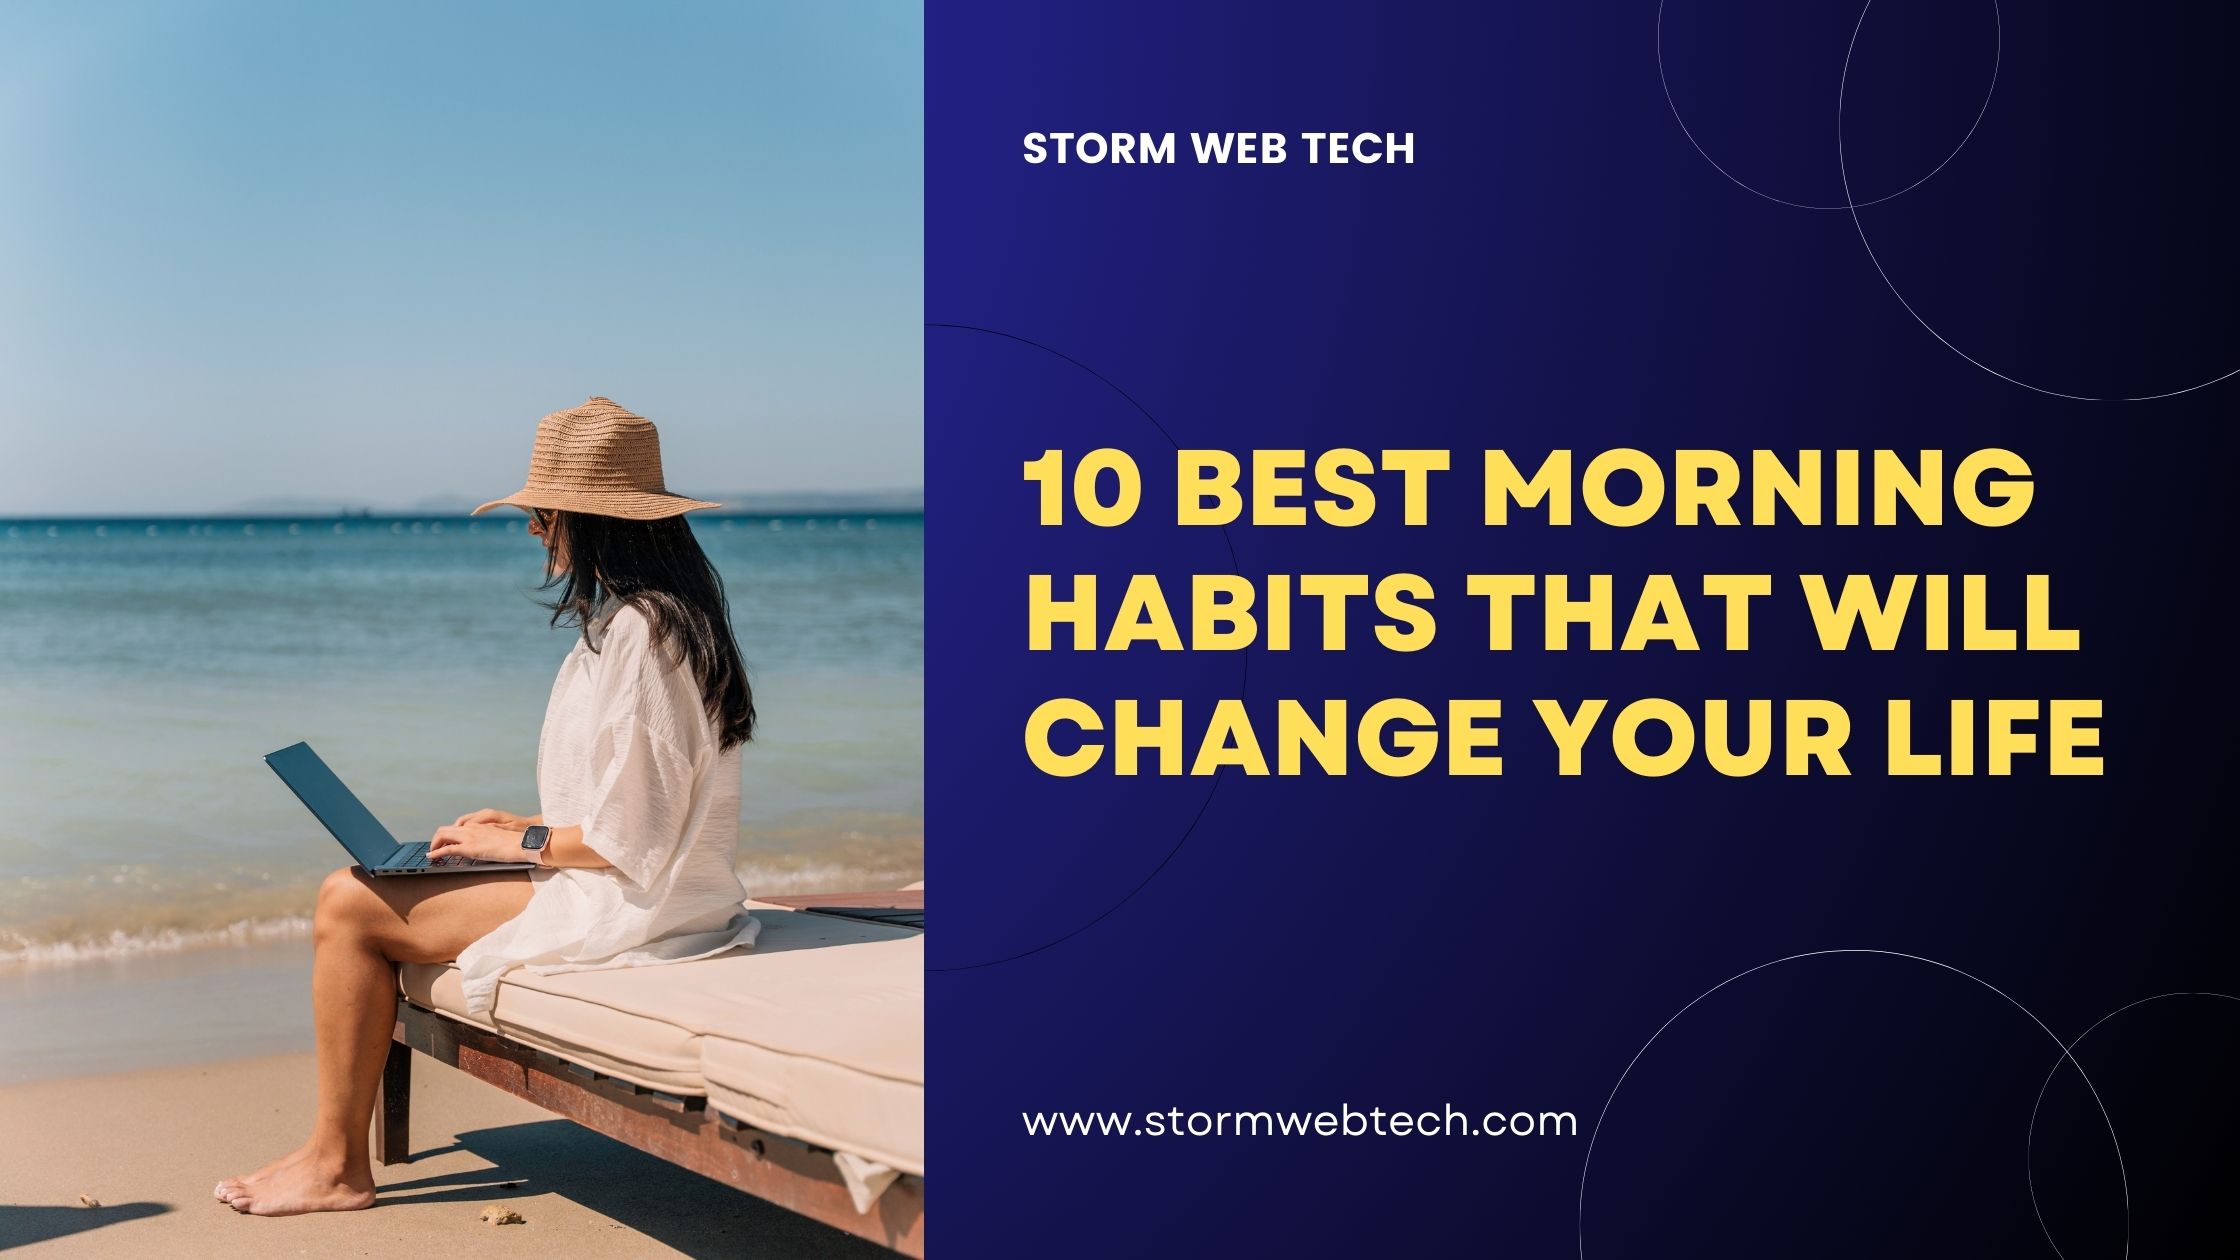 list of the 10 best morning habits that will change your life, that can truly transform your daily routine.